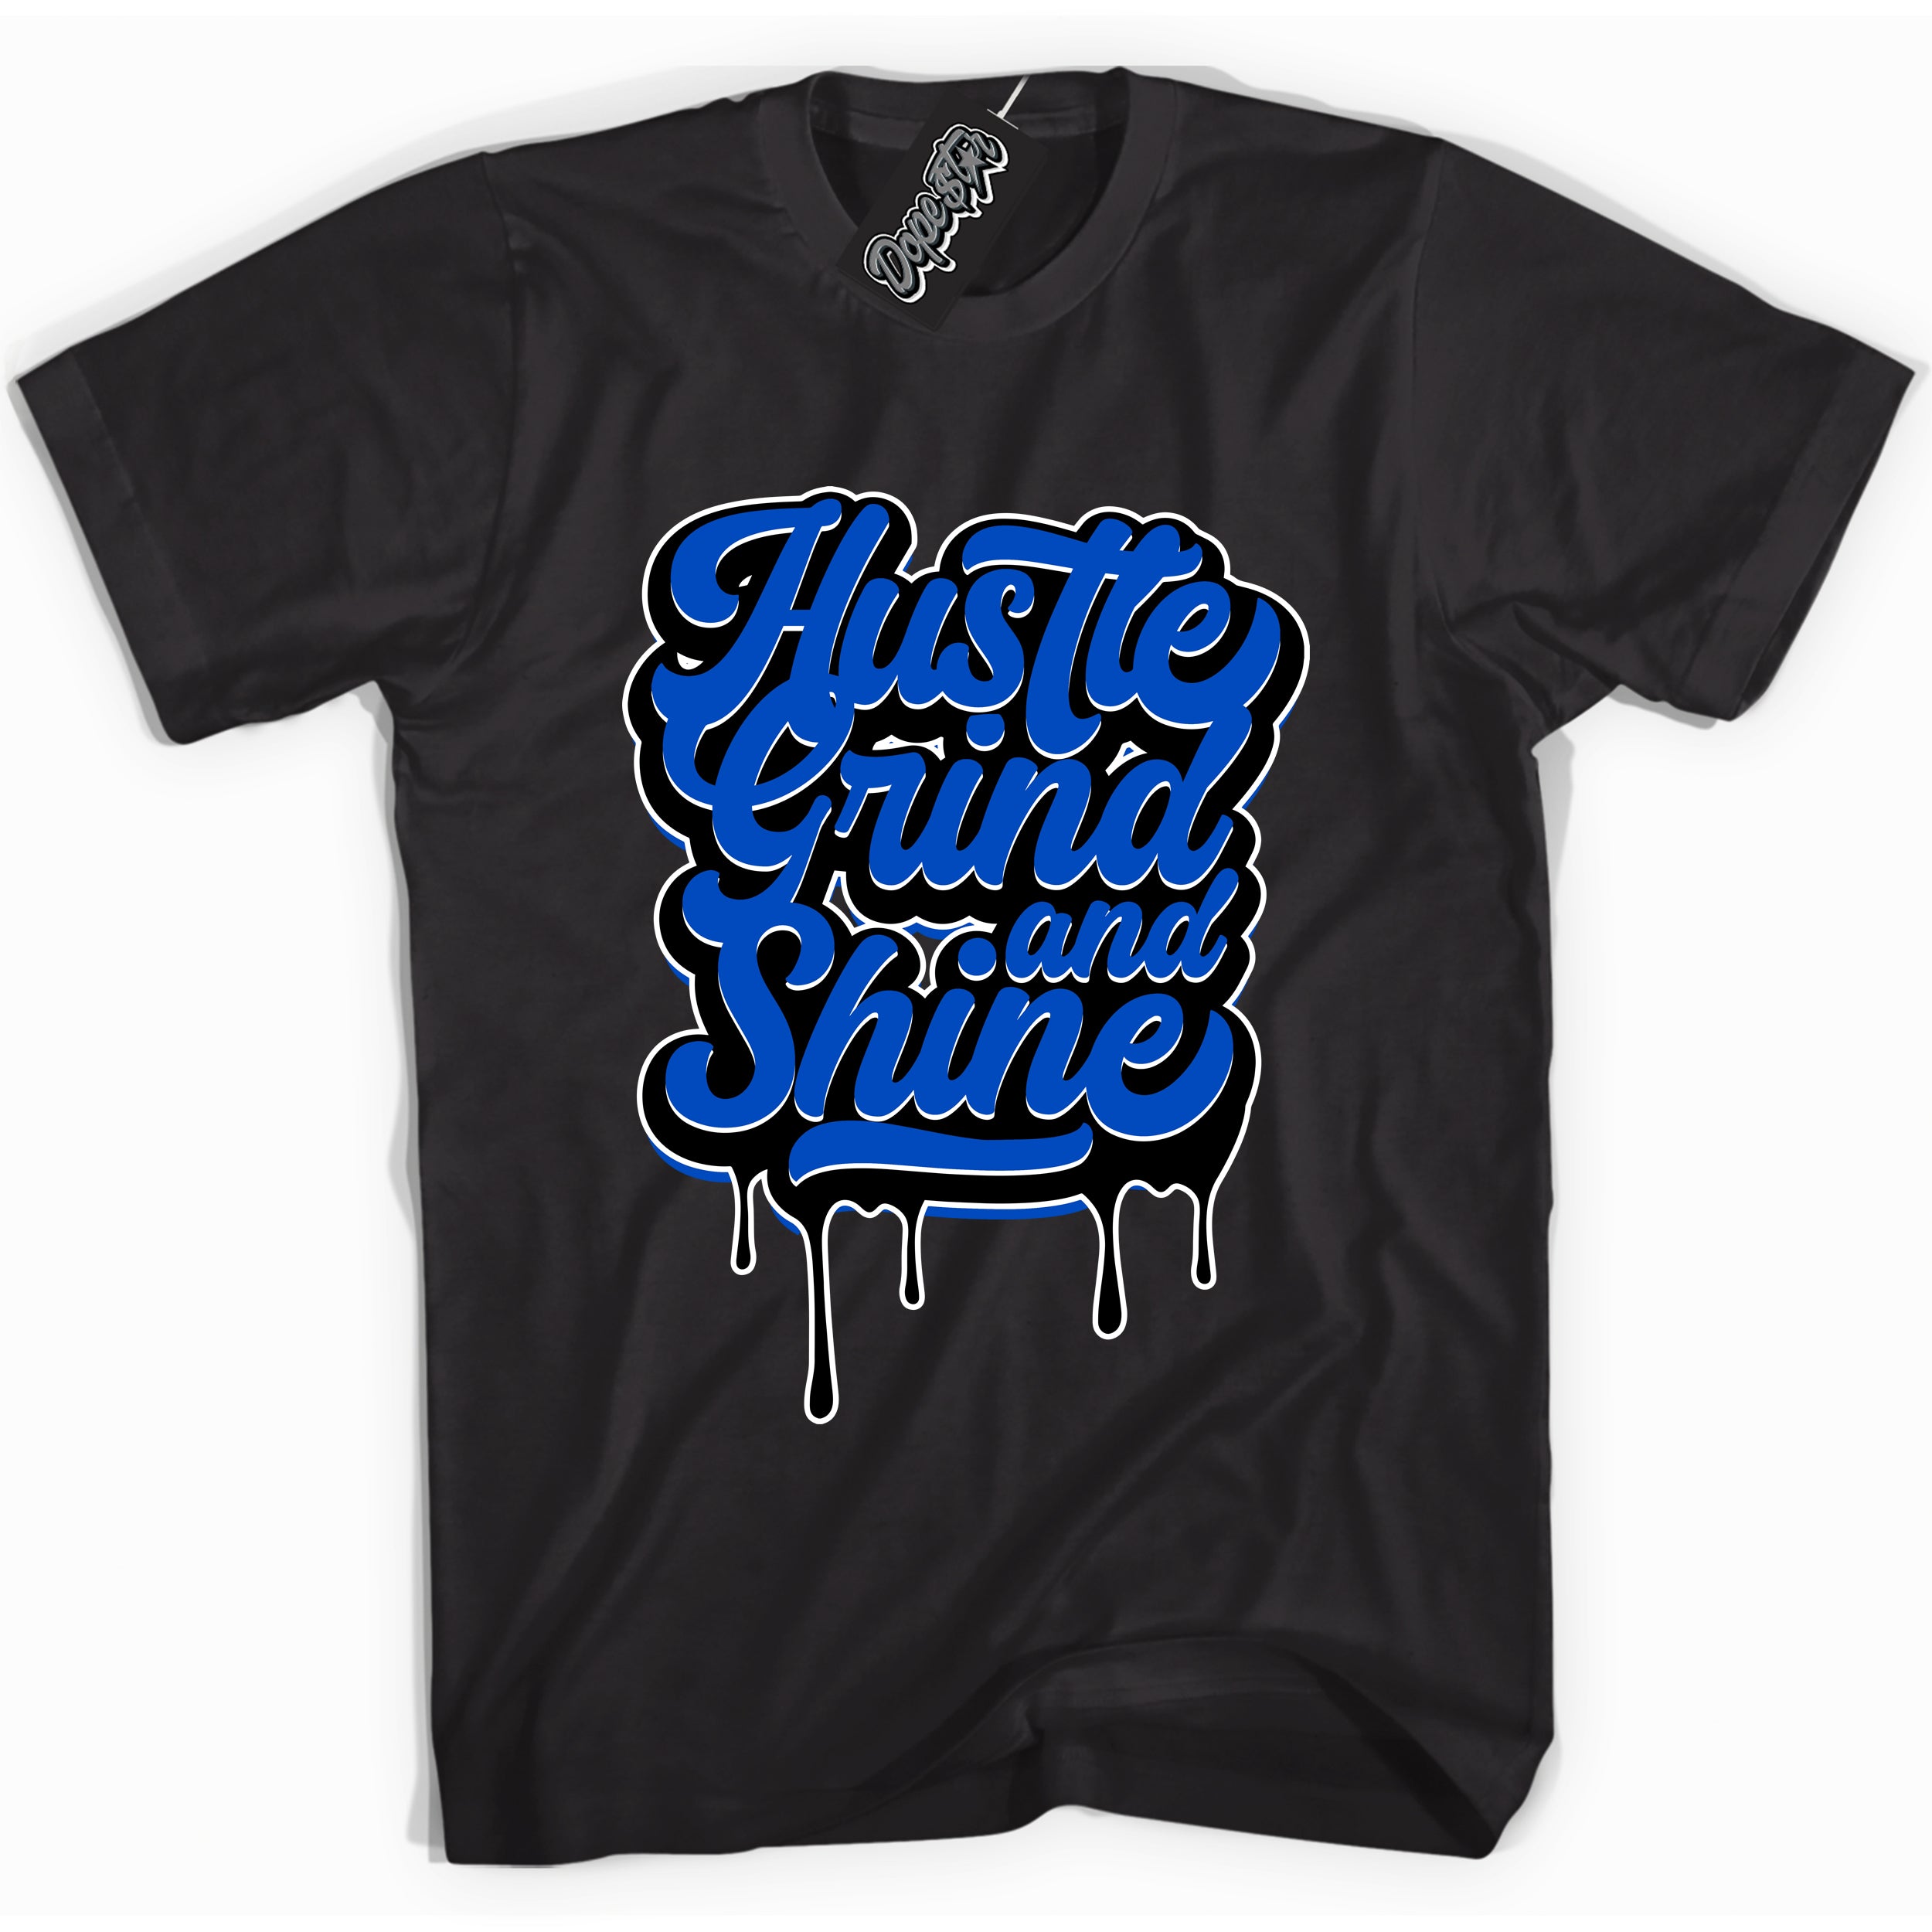 Cool Black graphic tee with Hustle Grind and Shine design, that perfectly matches Royal Reimagined 1s sneakers 